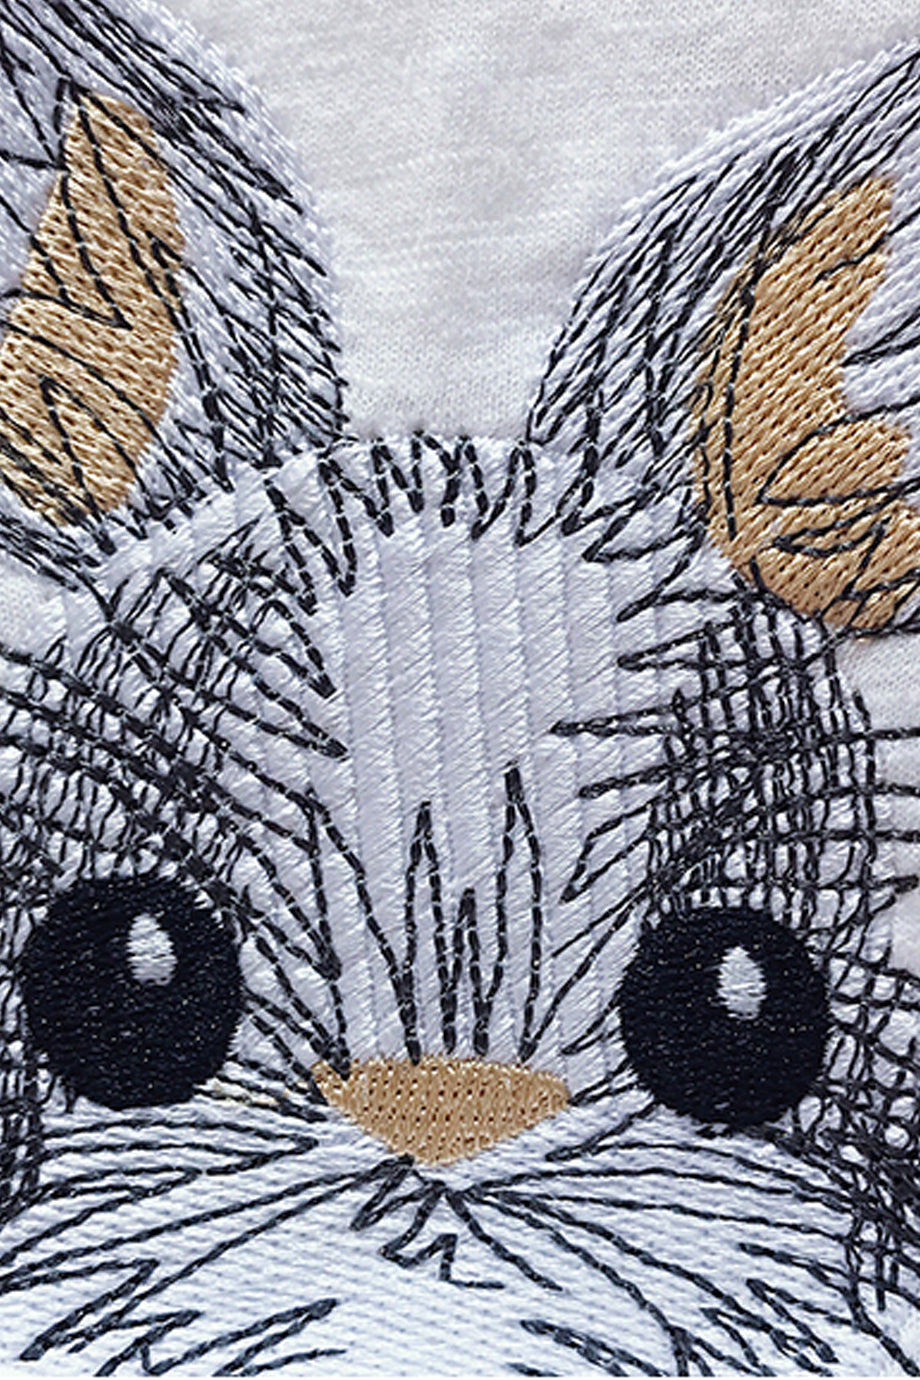 Rabbit White T-shirt with Embroidery